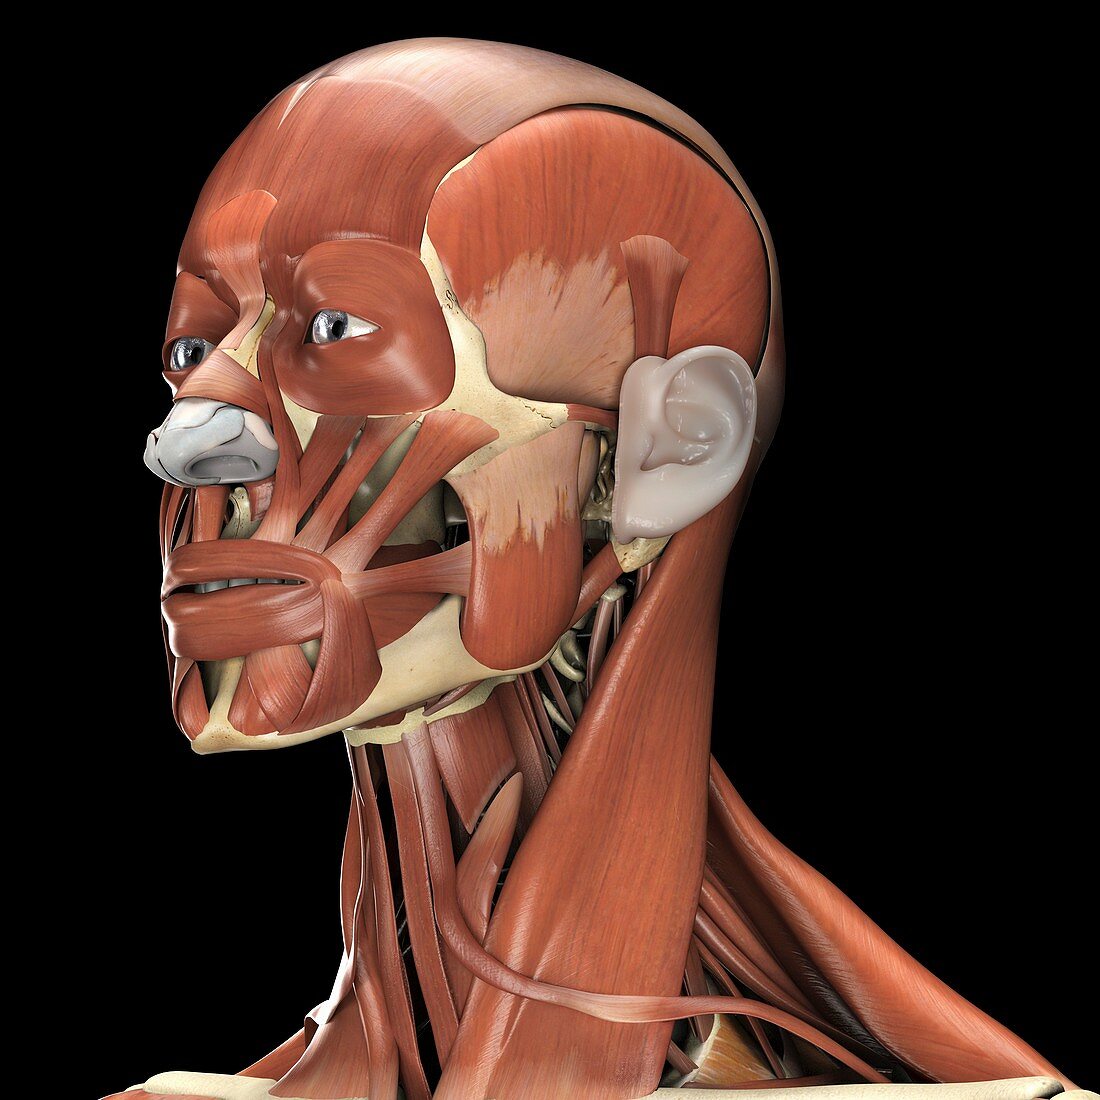 Muscles of the Head and Neck, artwork